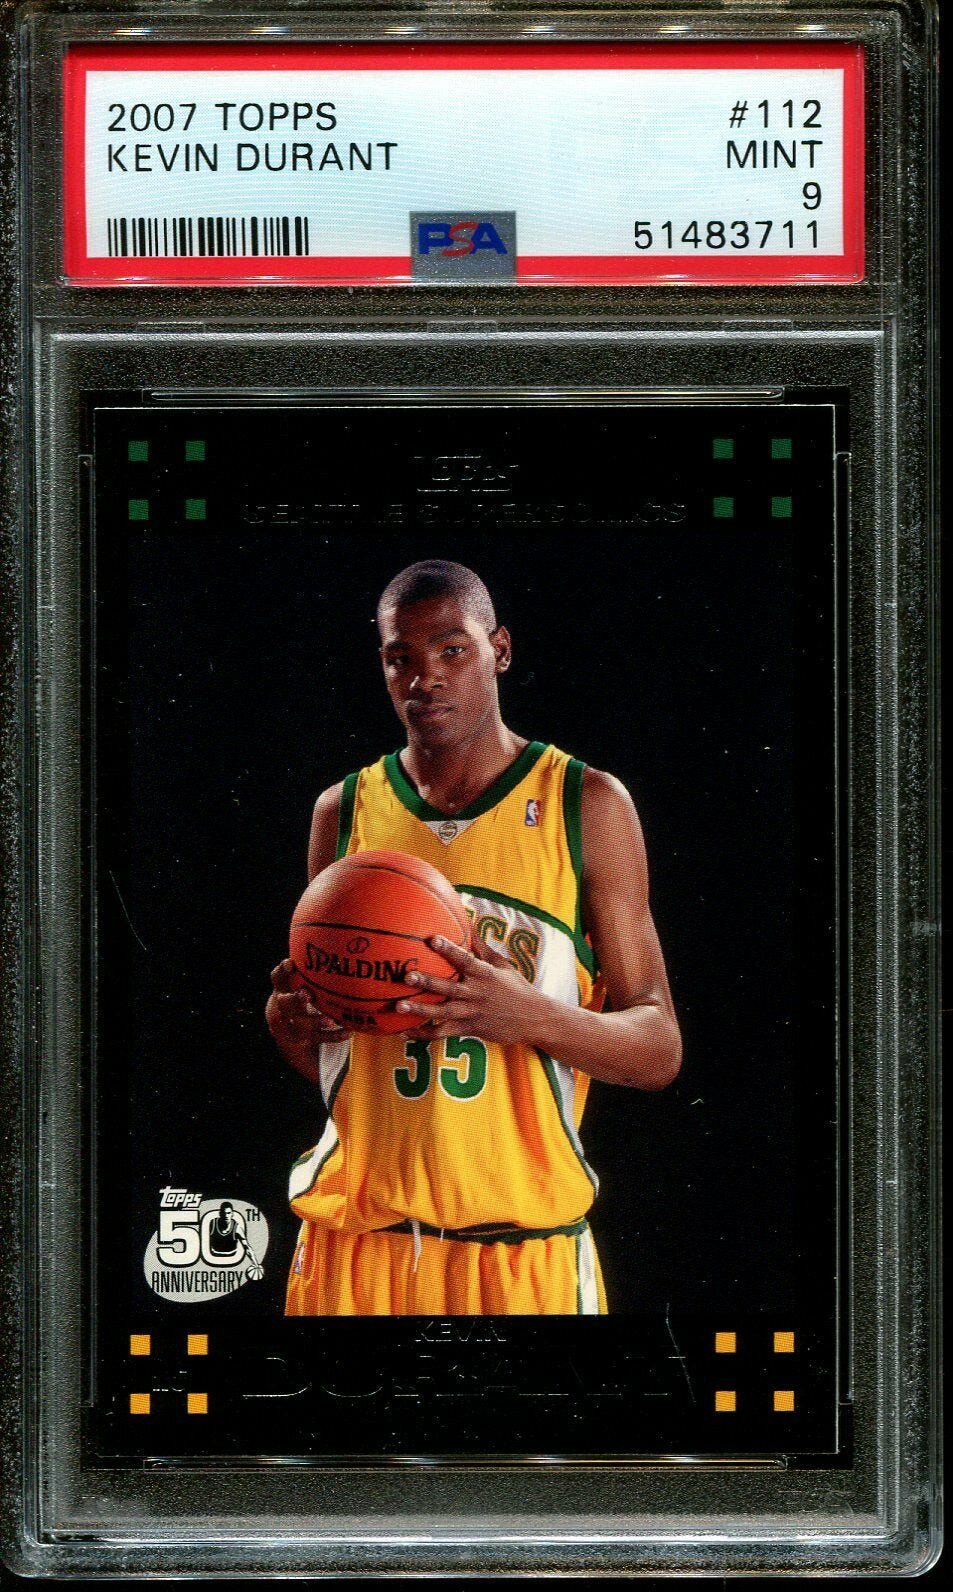 Image 1 - 2007-TOPPS-112-KEVIN-DURANT-RC-PSA-9-A3024389-711